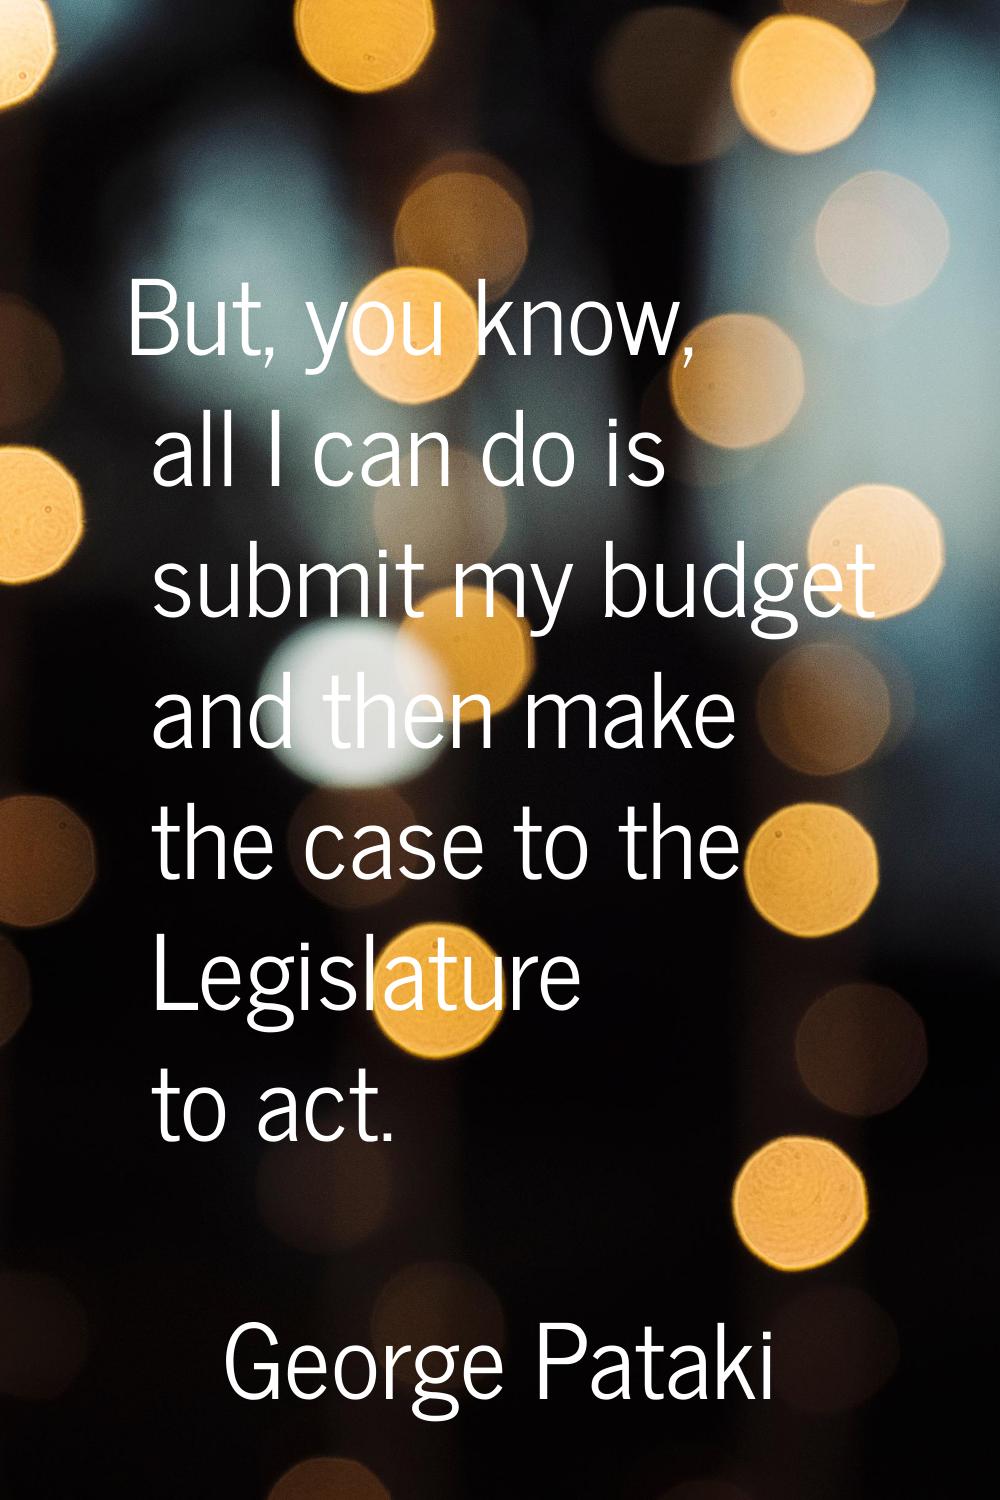 But, you know, all I can do is submit my budget and then make the case to the Legislature to act.